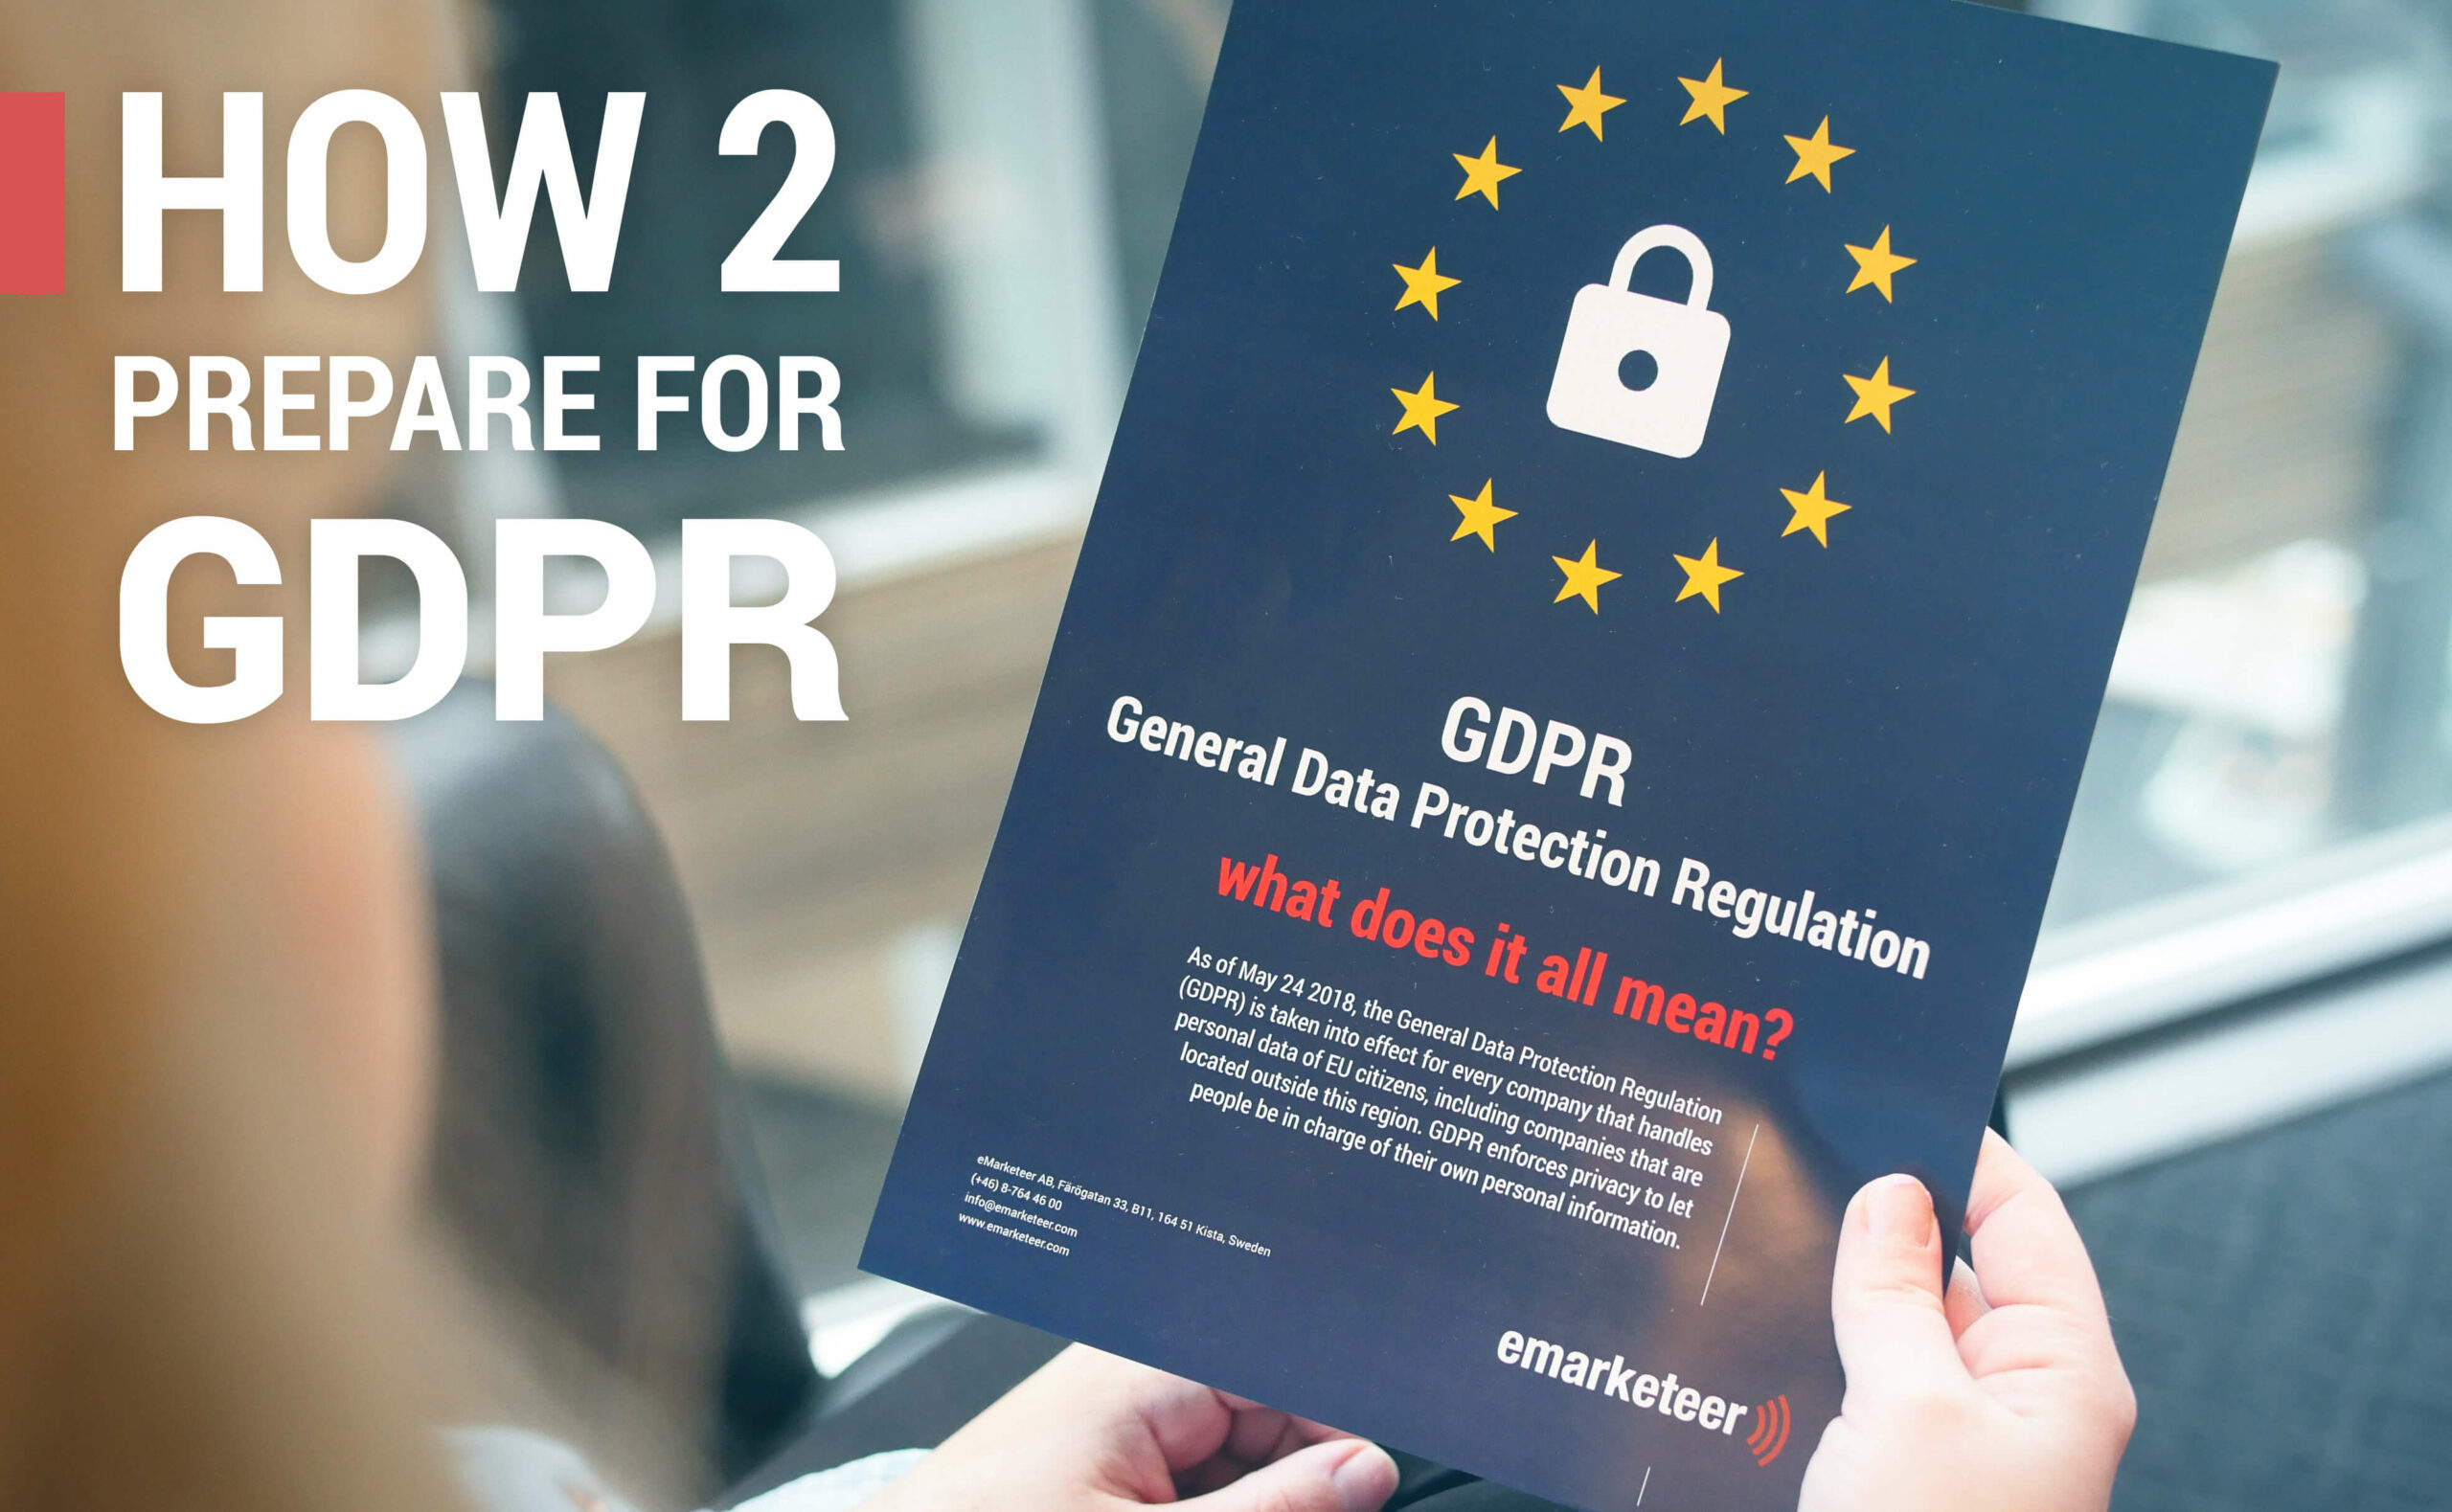 General Data Protection regulation is approaching, this is how to prepare for it